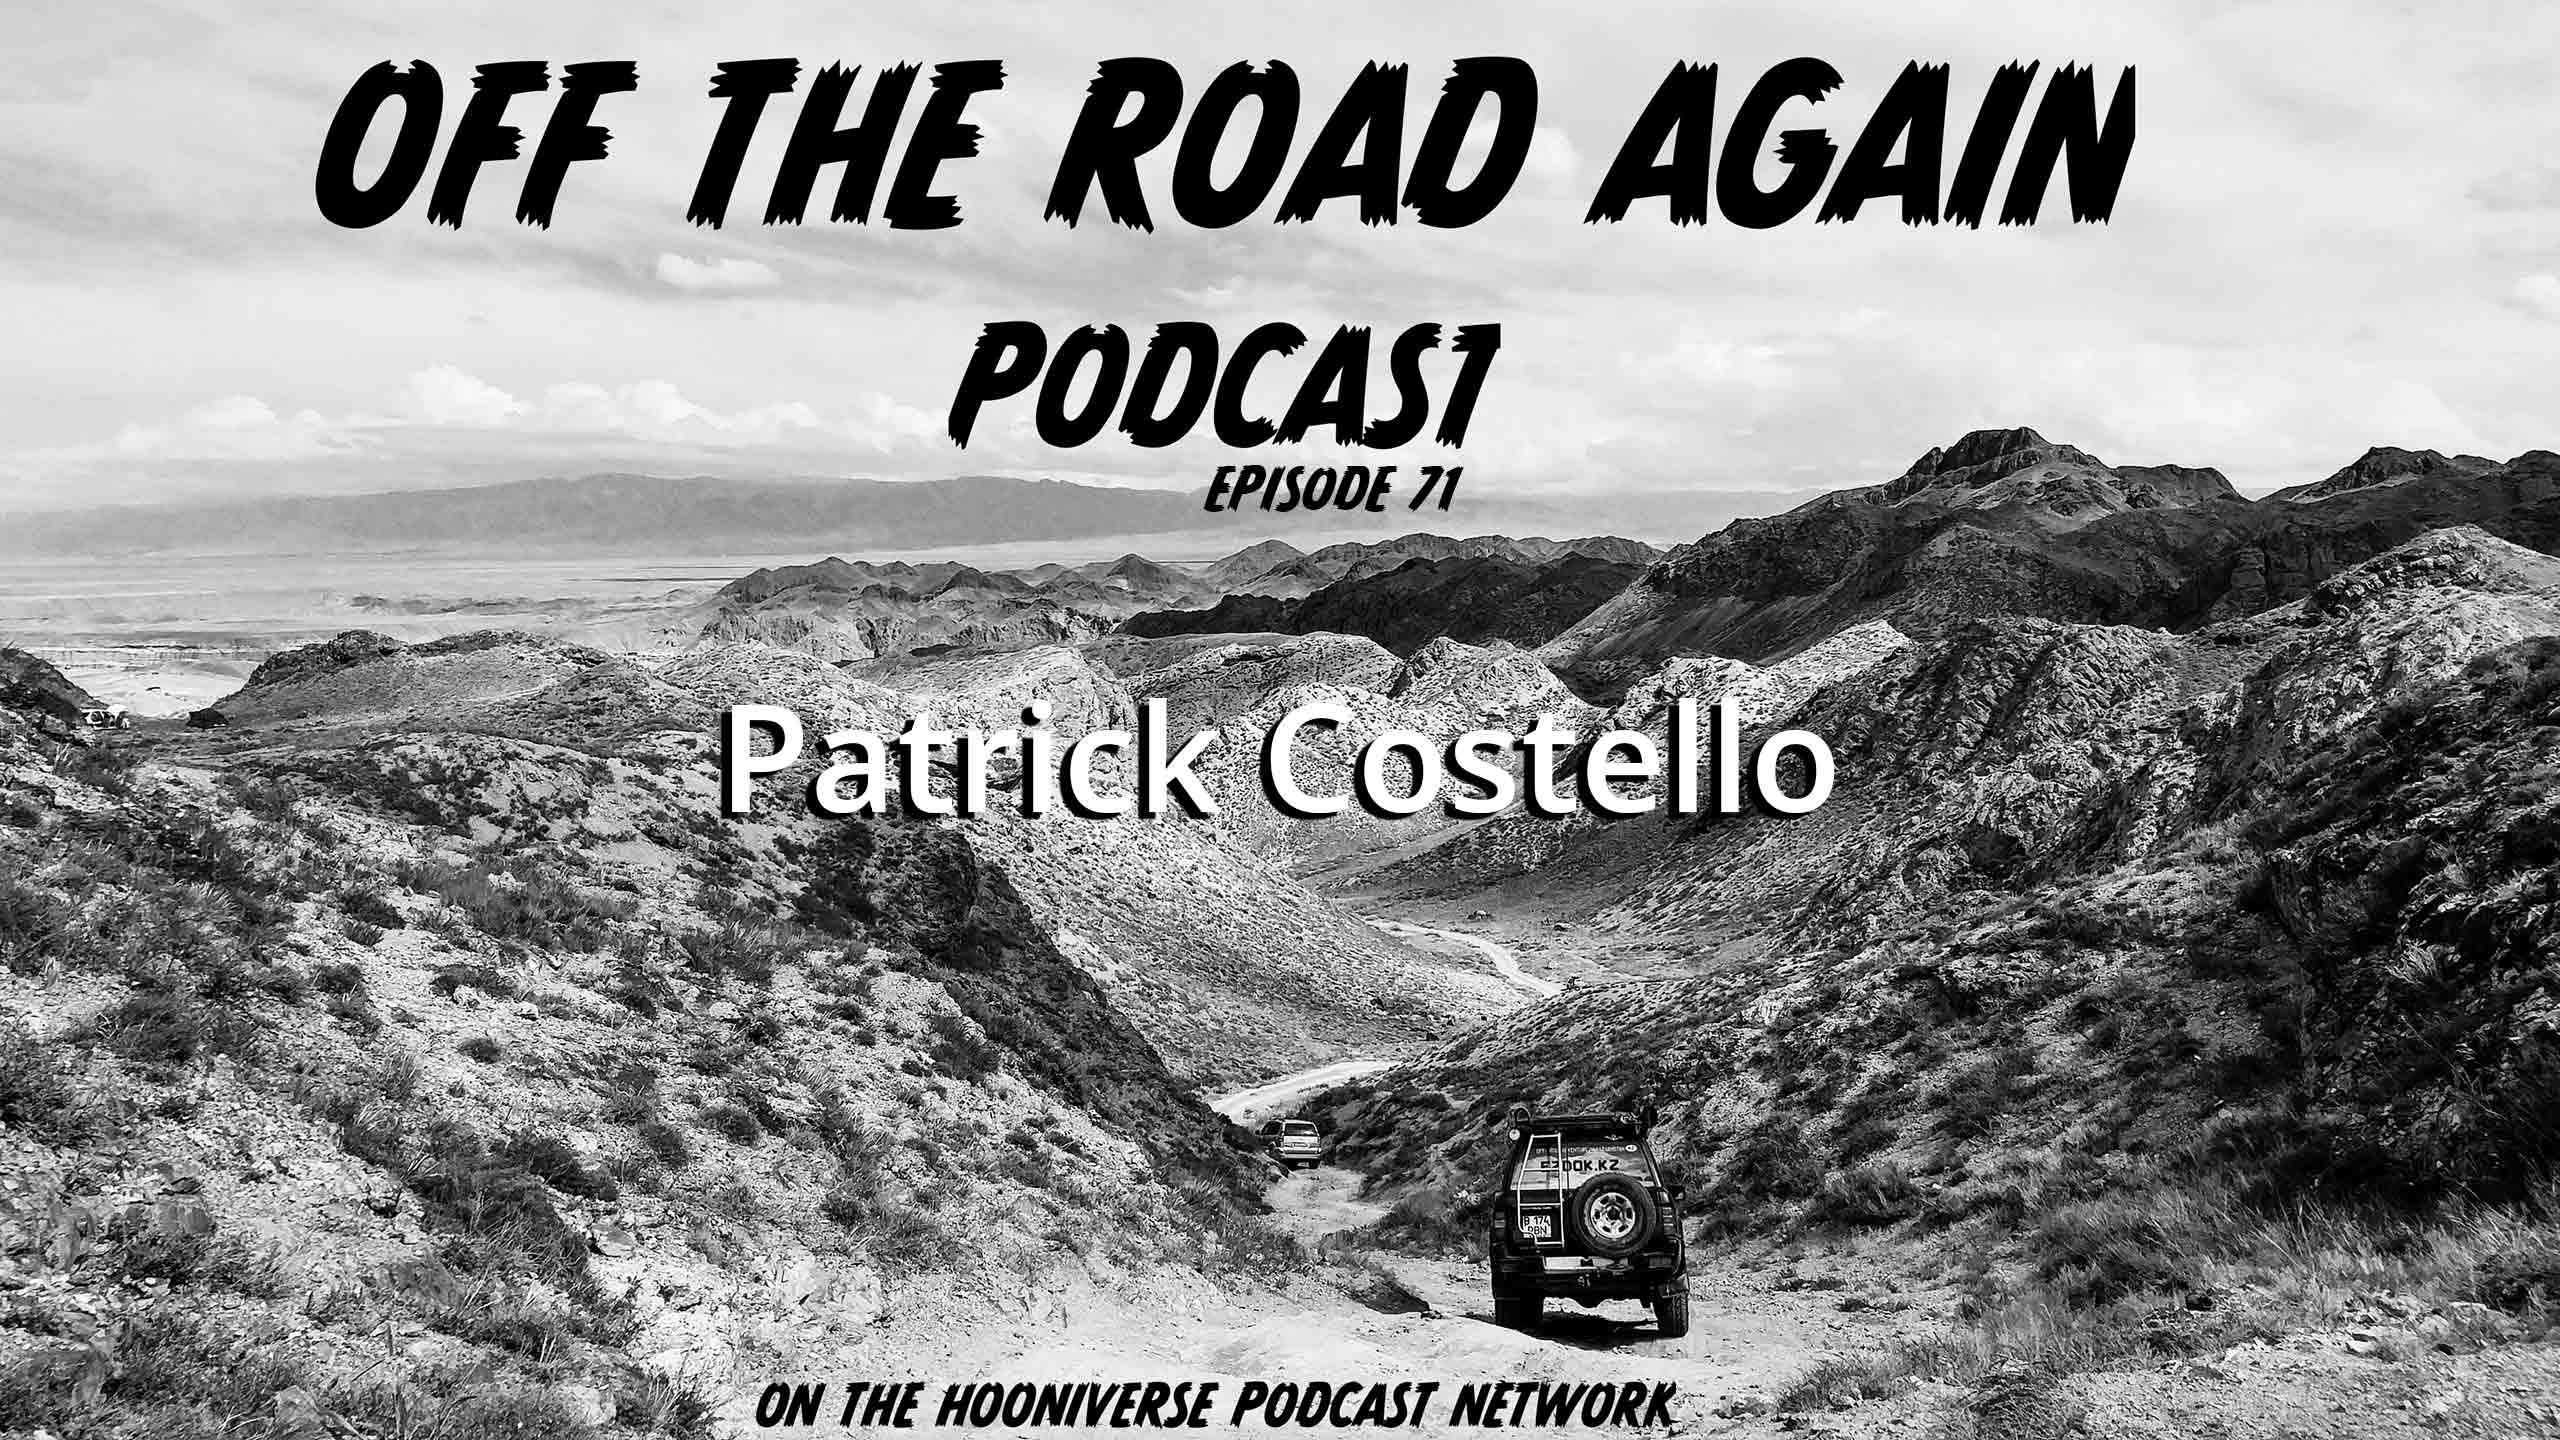 Patrick-Costello-Off-The-Road-Again-Podcast-Episode-71